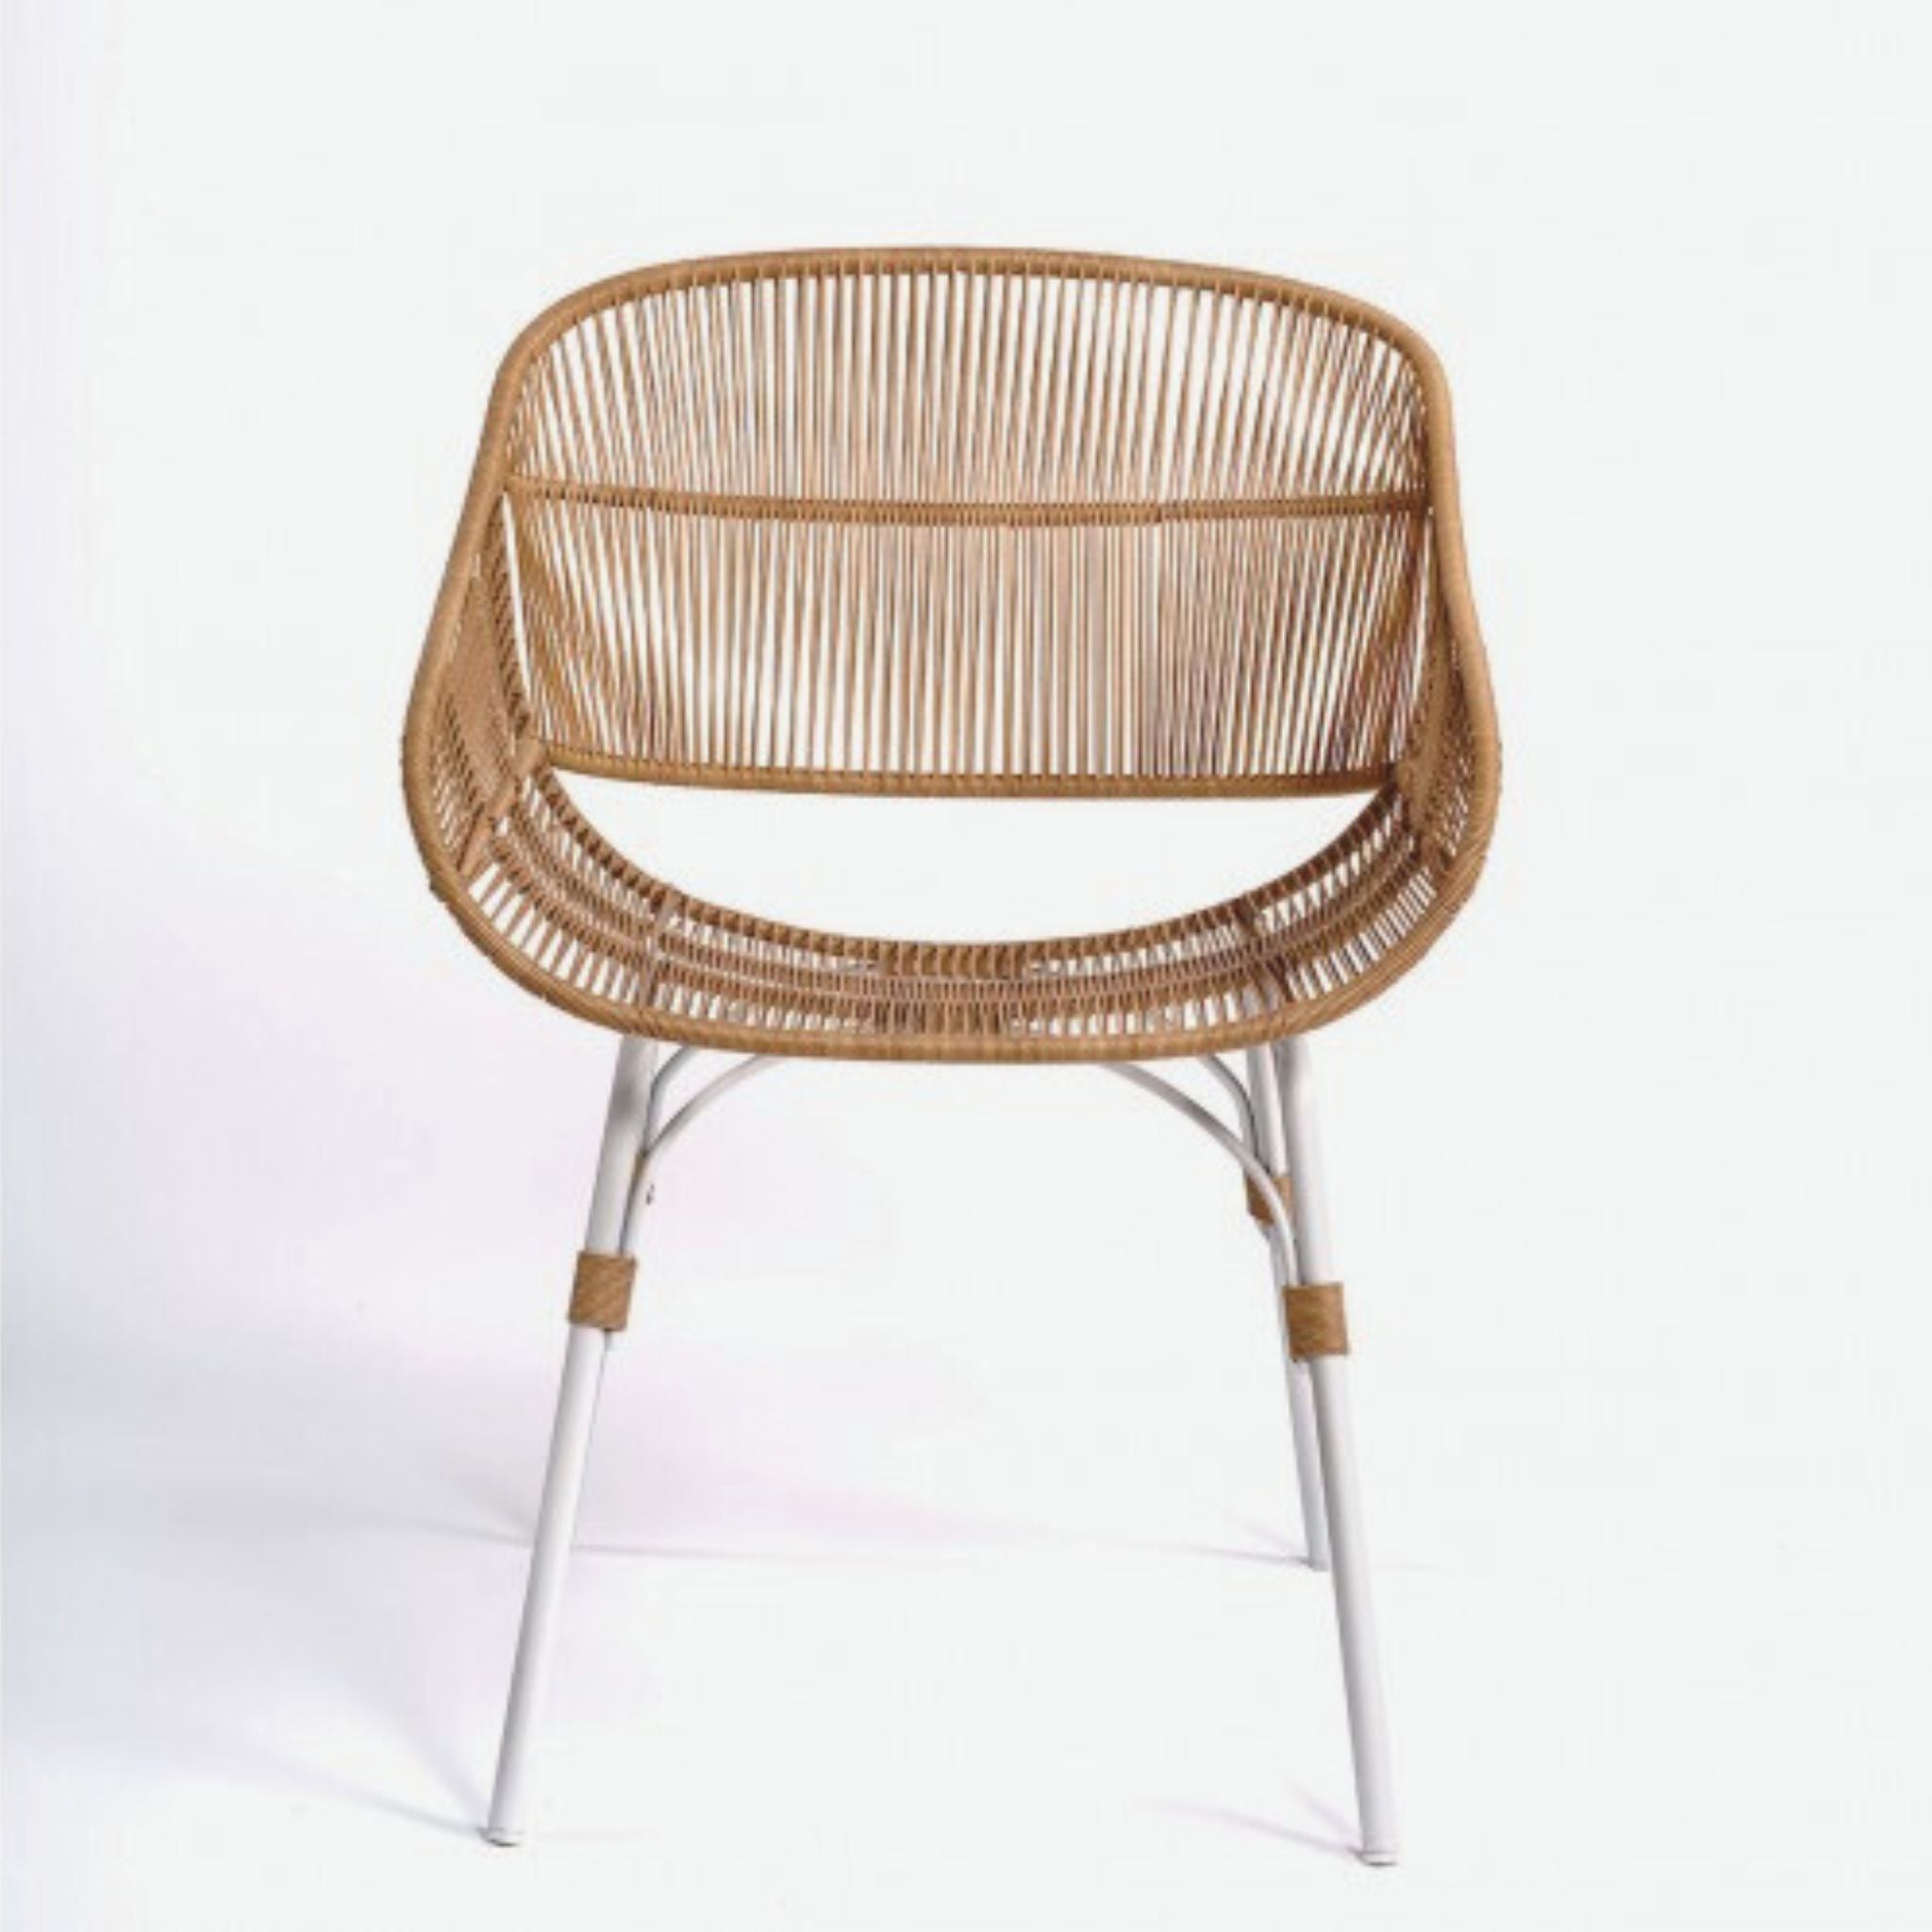 Crisal Decoracion Lopa Outdoor Chair with Arms in Natural Colour Resin and Stone Coloured Metal Leg - ModernistaLiving